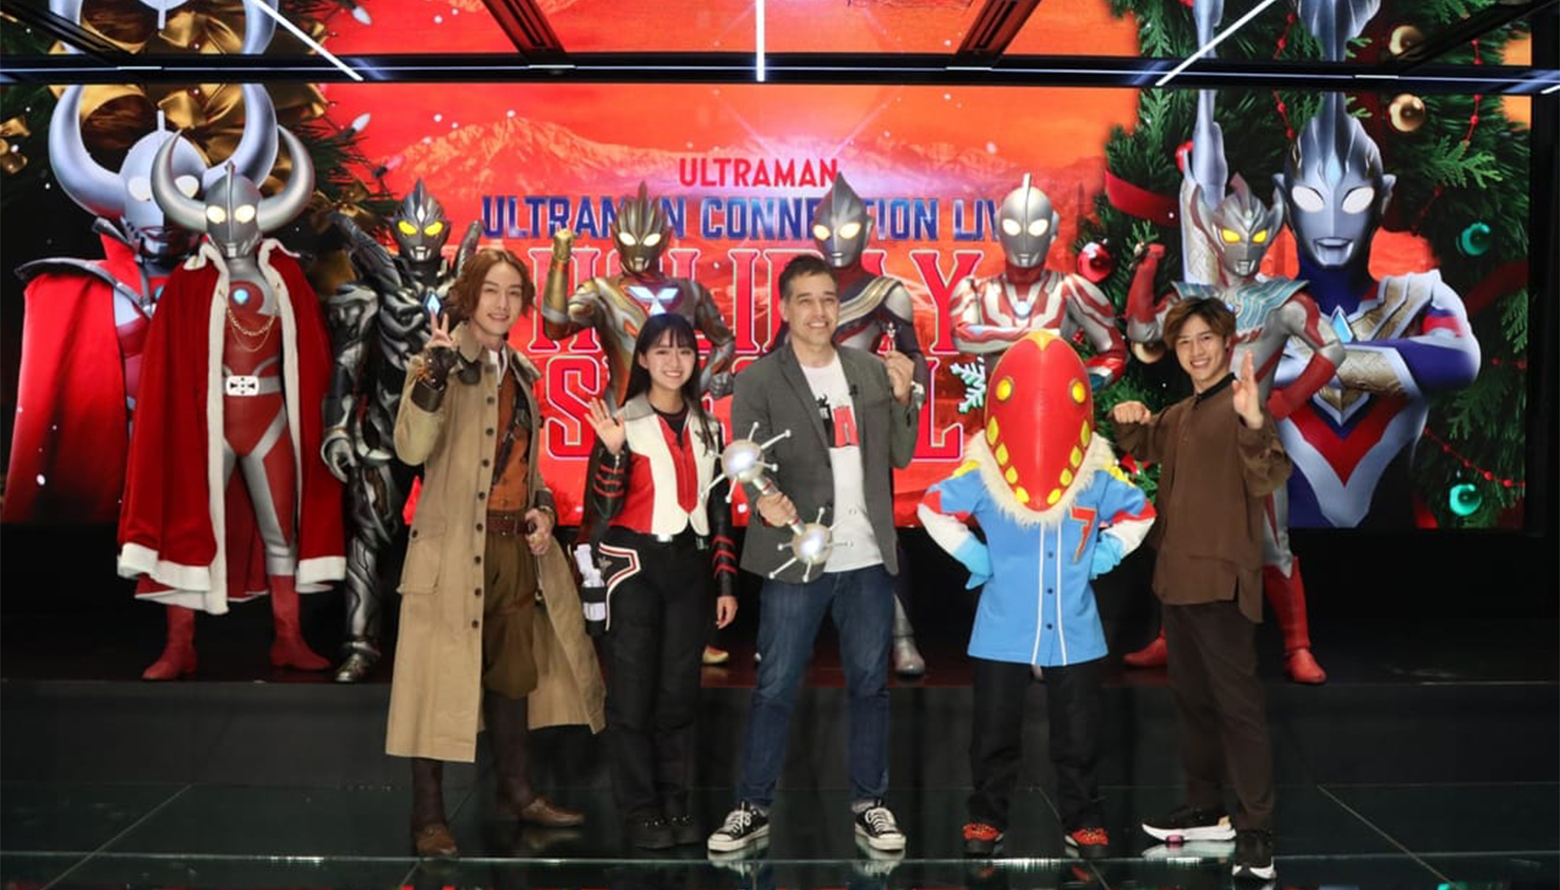 ULTRAMAN CONNECTION LIVE: HOLIDAY SPECIAL BRINGS FANS MANY SURPRISES & EXCLUSIVES!